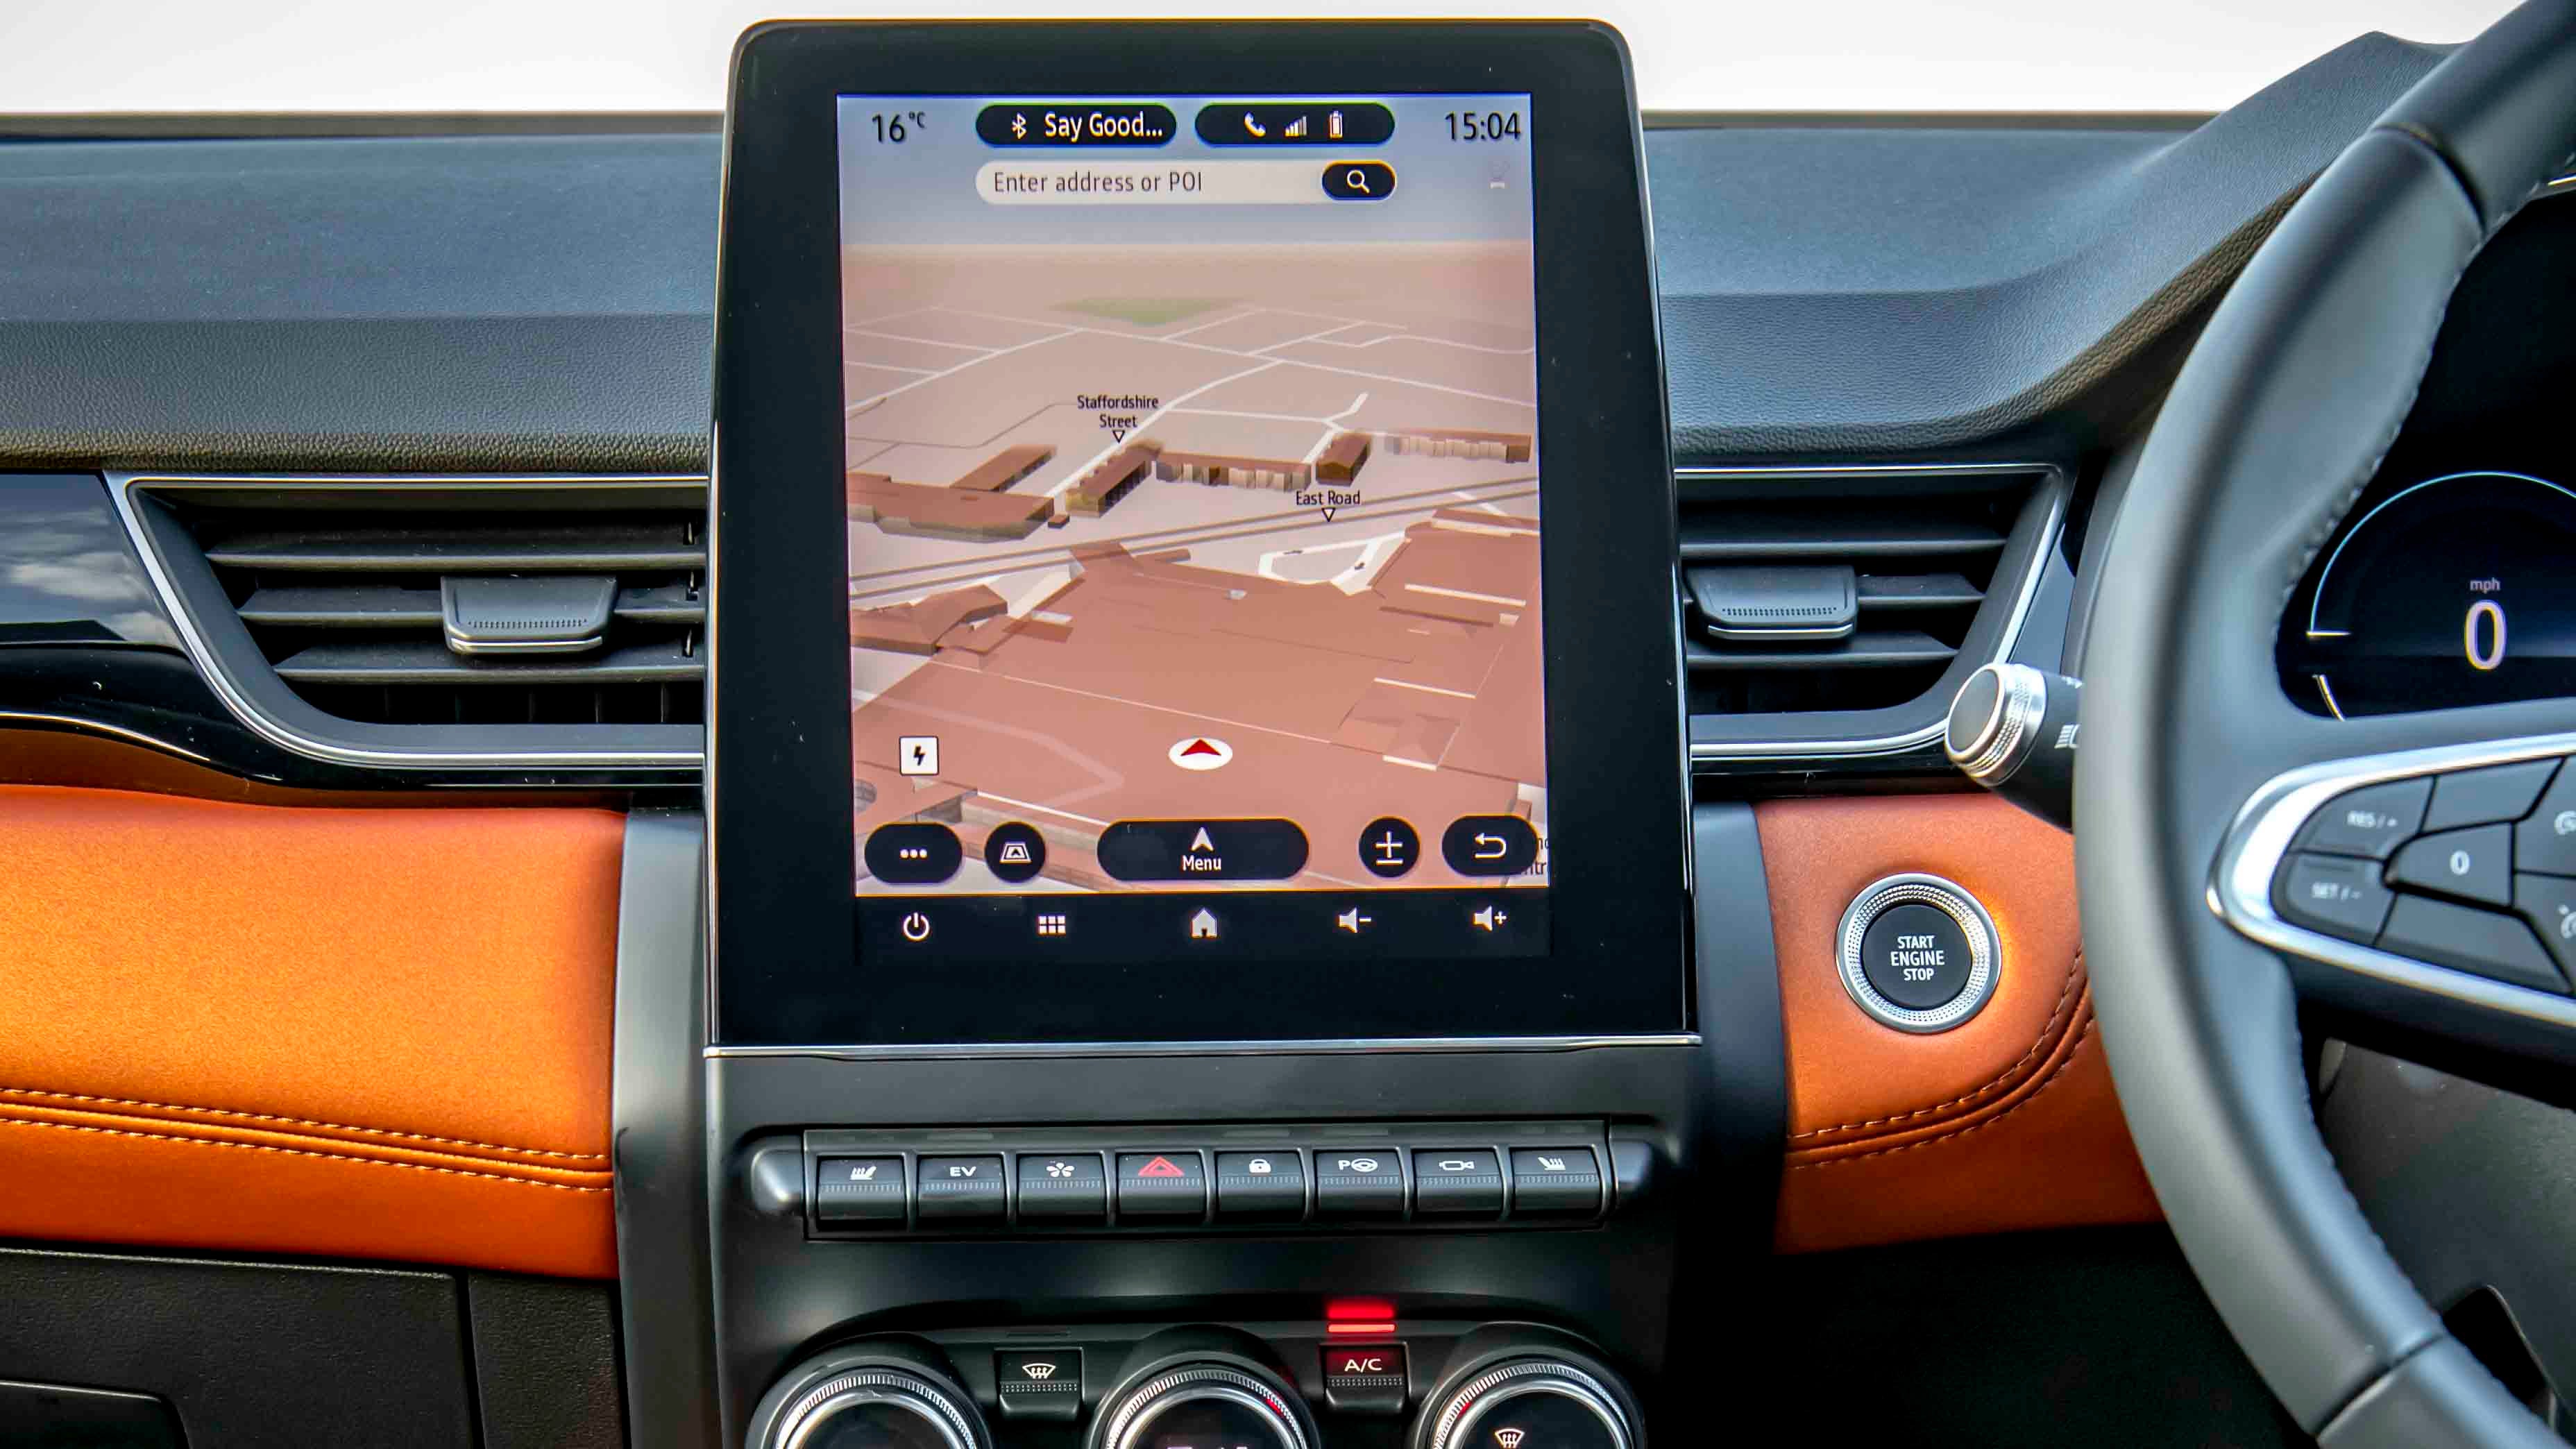 Renault Captur with the larger touchscreen